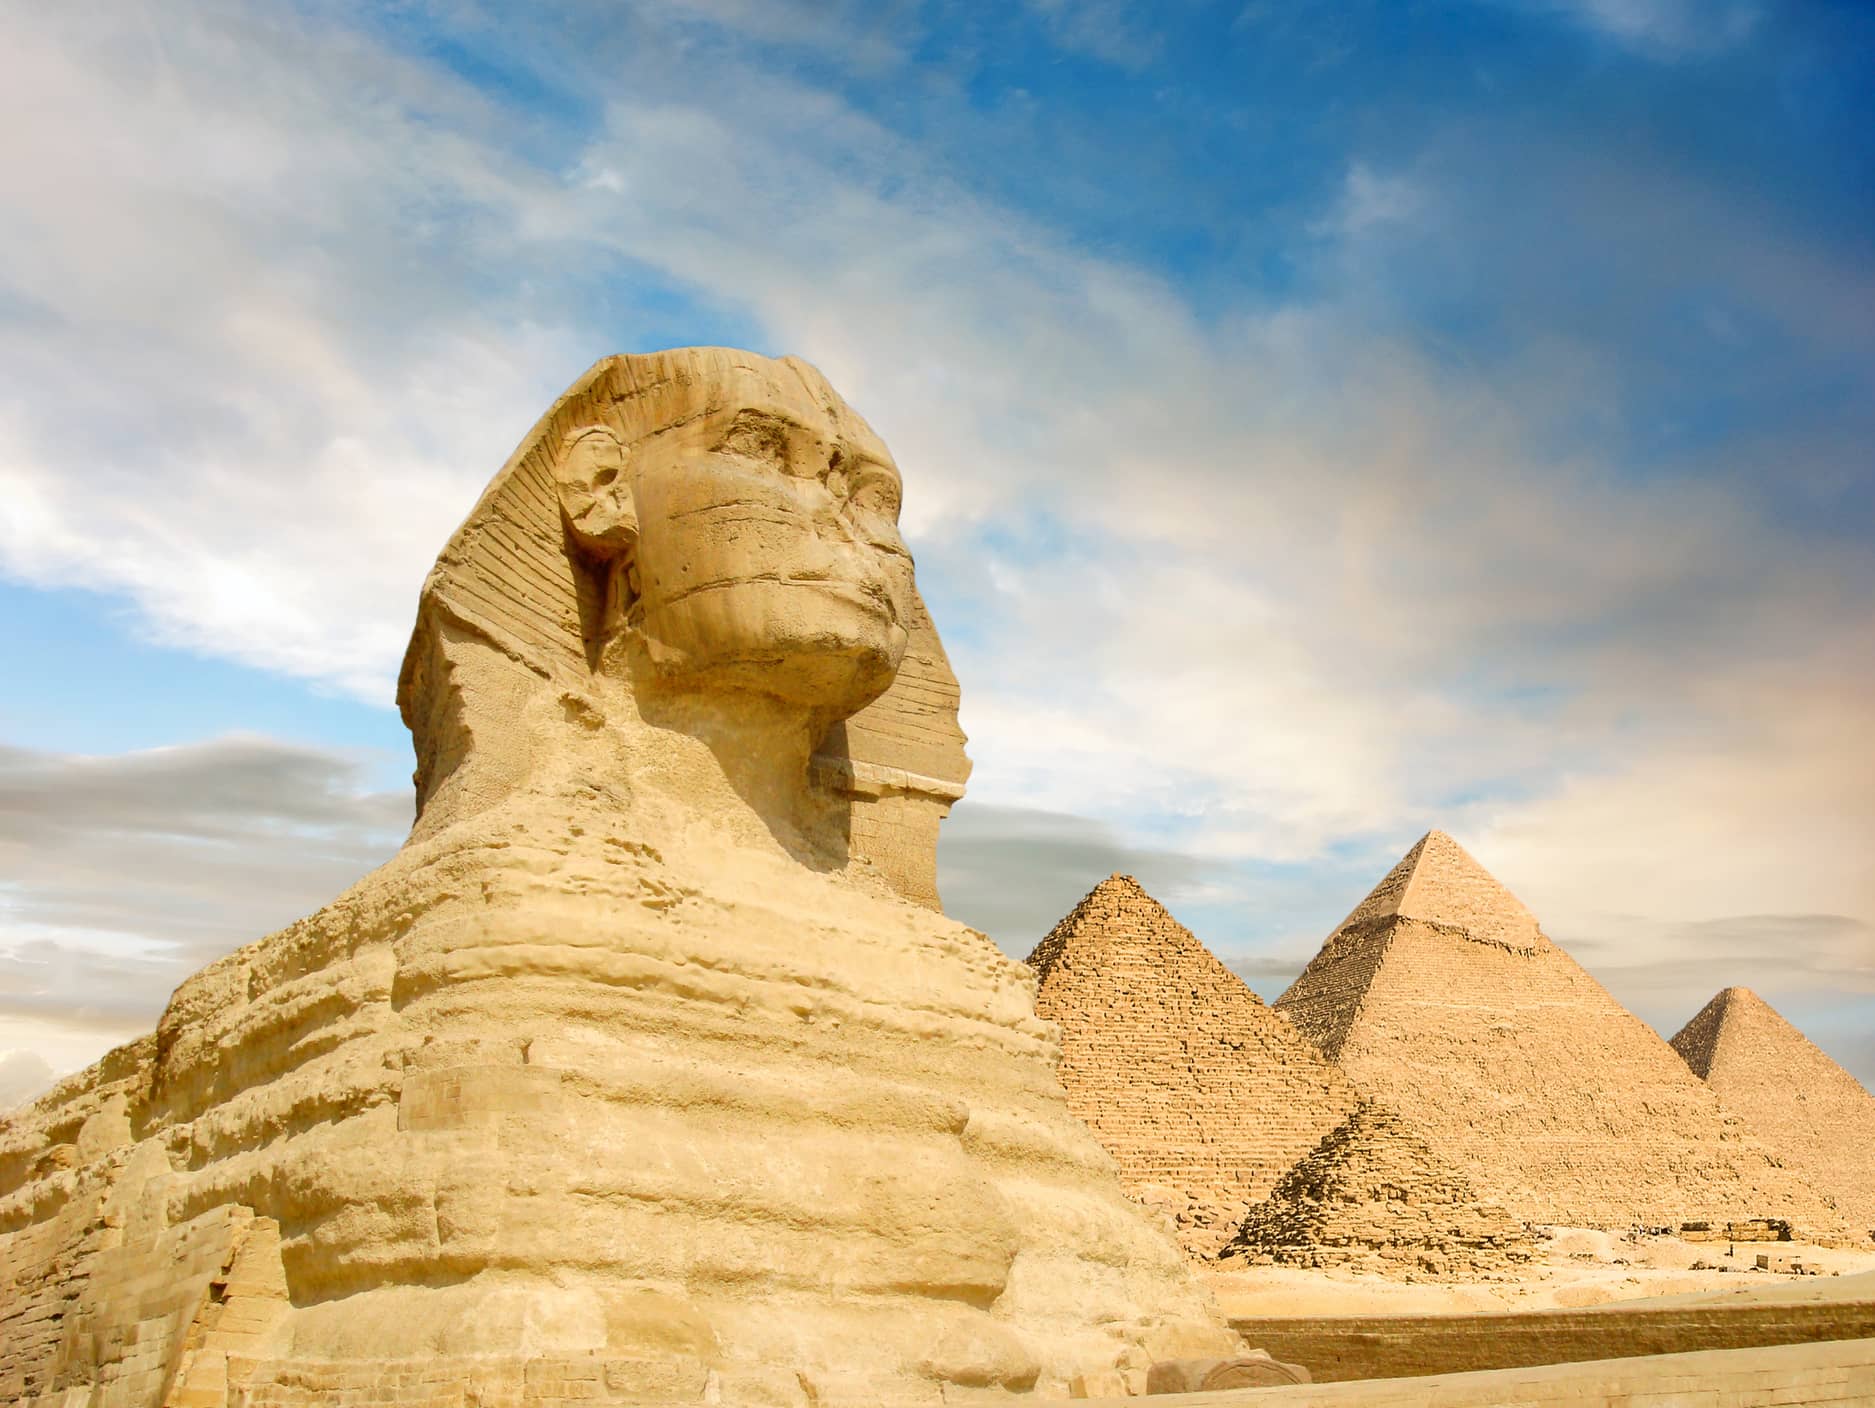  Step Into Egypt’s Treasured Past with an Exclusive Museum Visit  